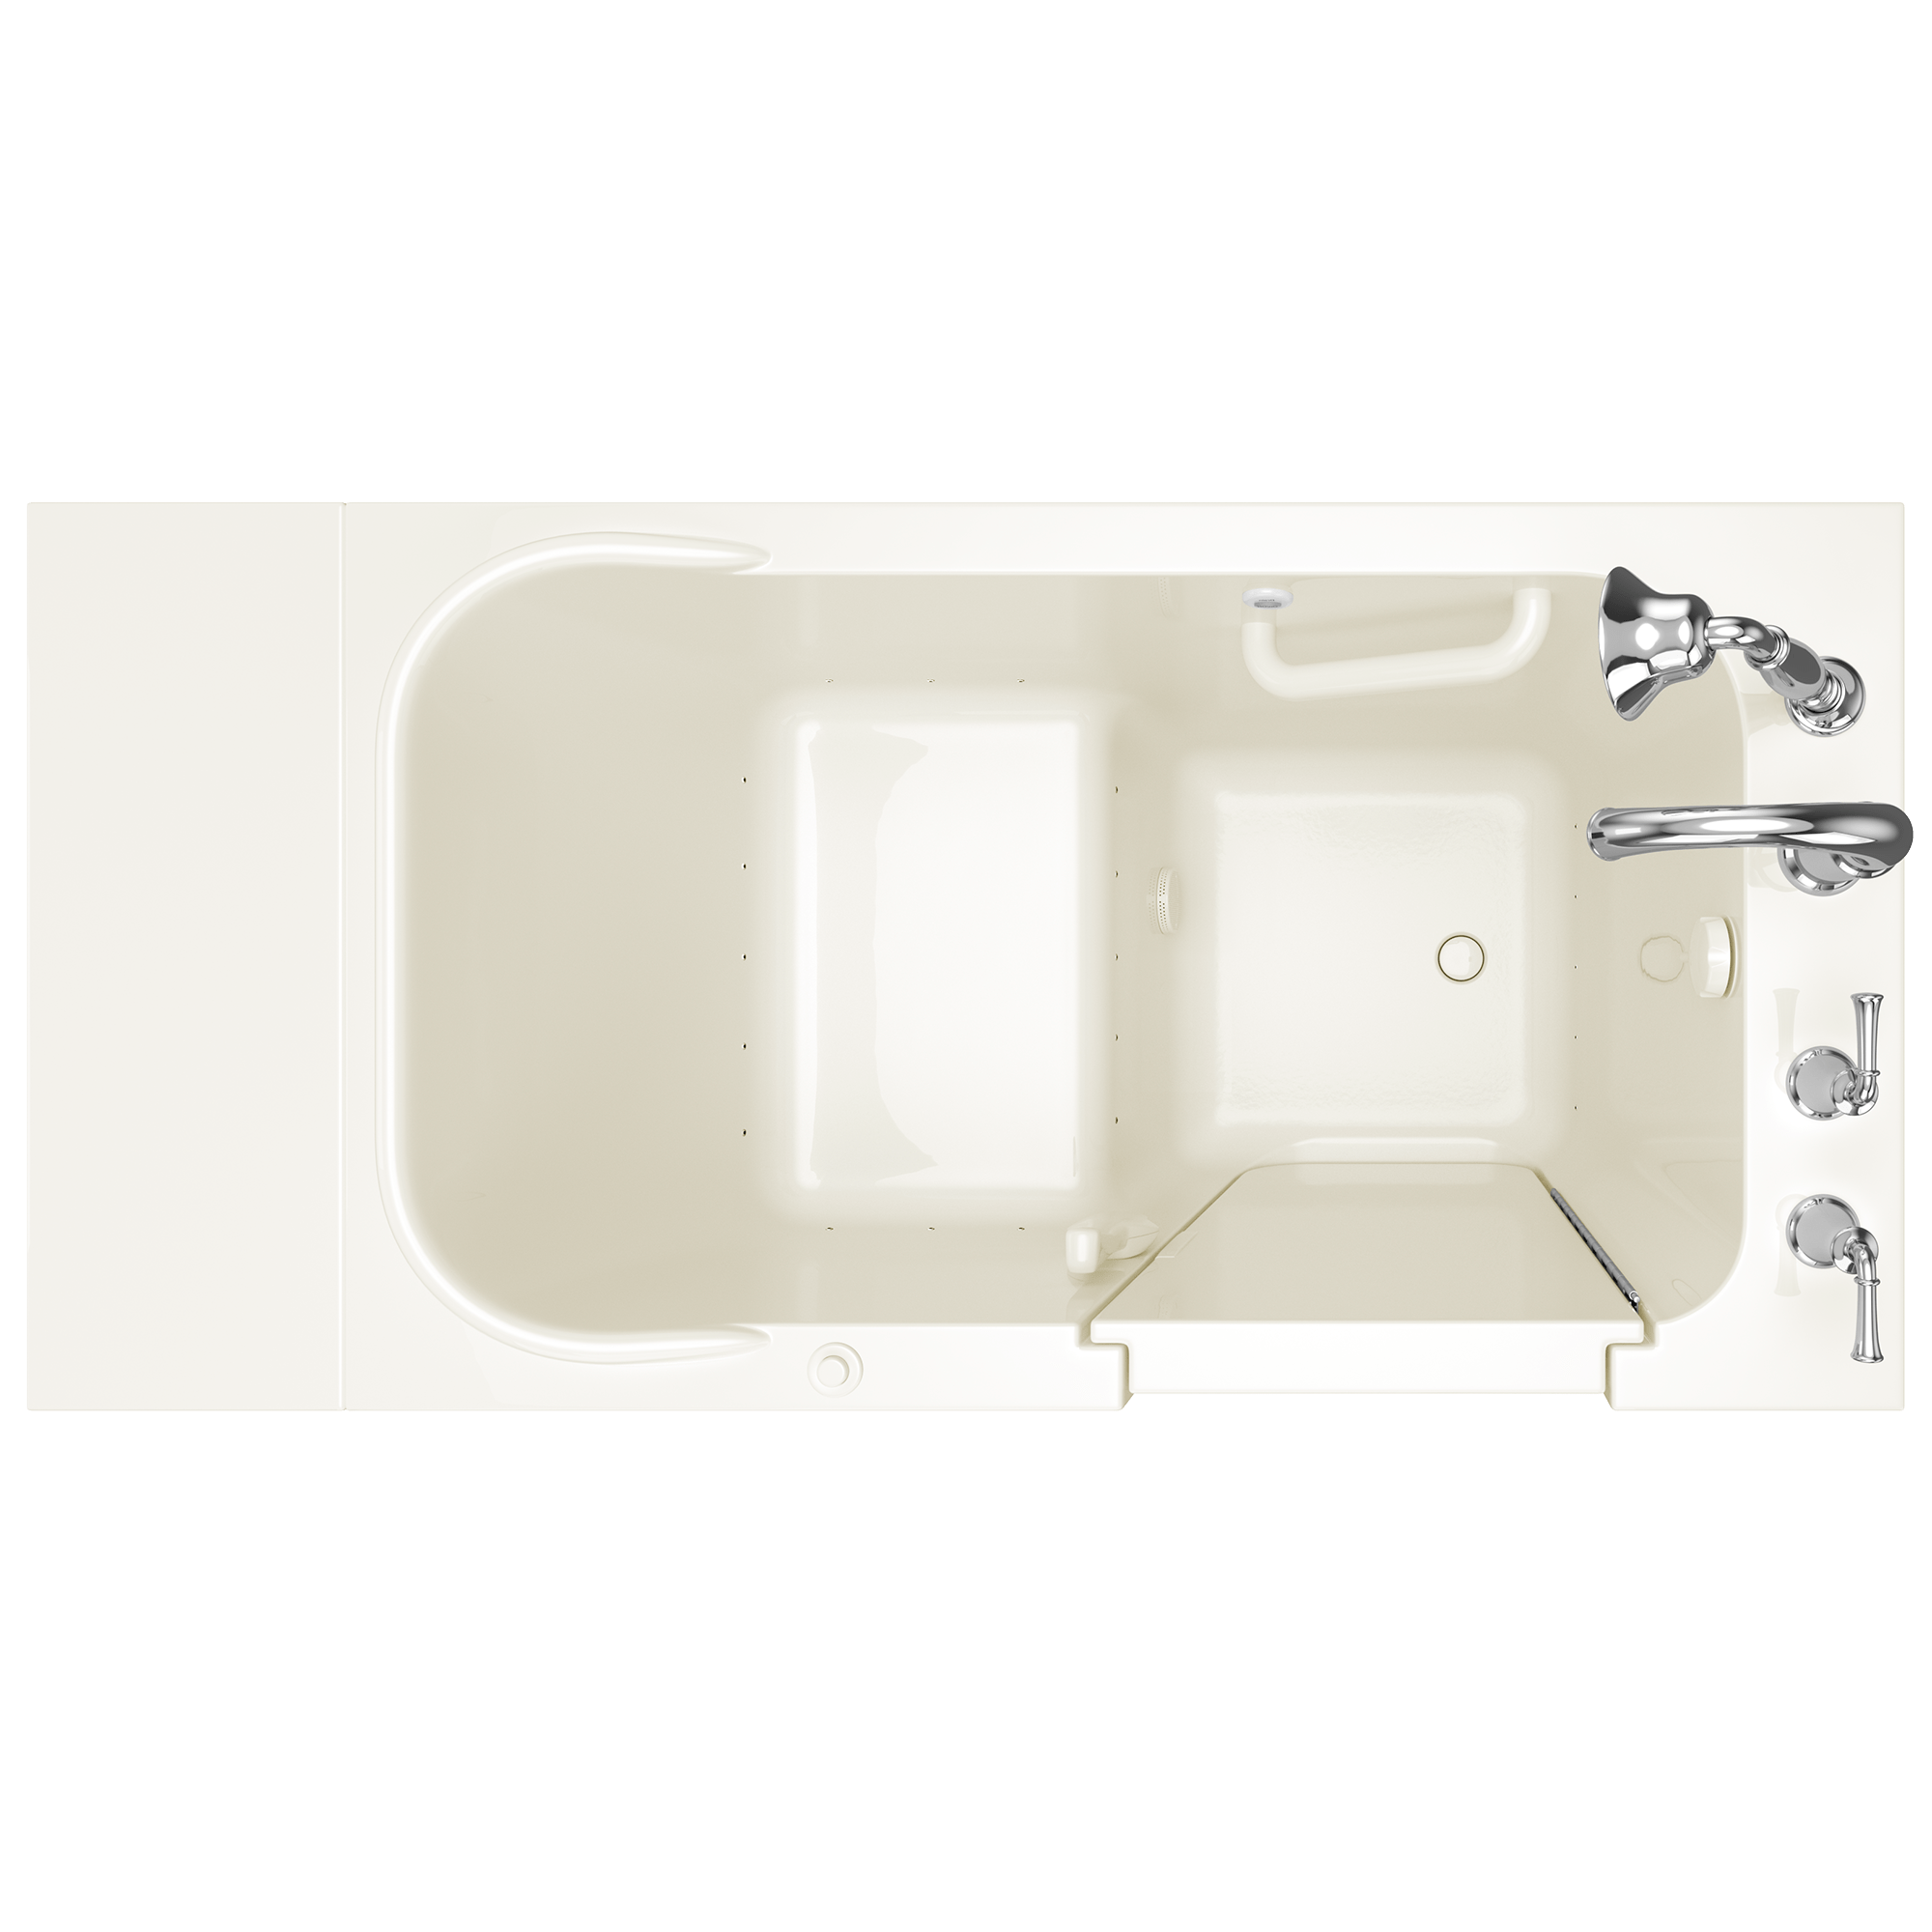 Gelcoat Value Series 28 x 48 Inch Walk in Tub With Air Spa System   Right Hand Drain With Faucet WIB LINEN